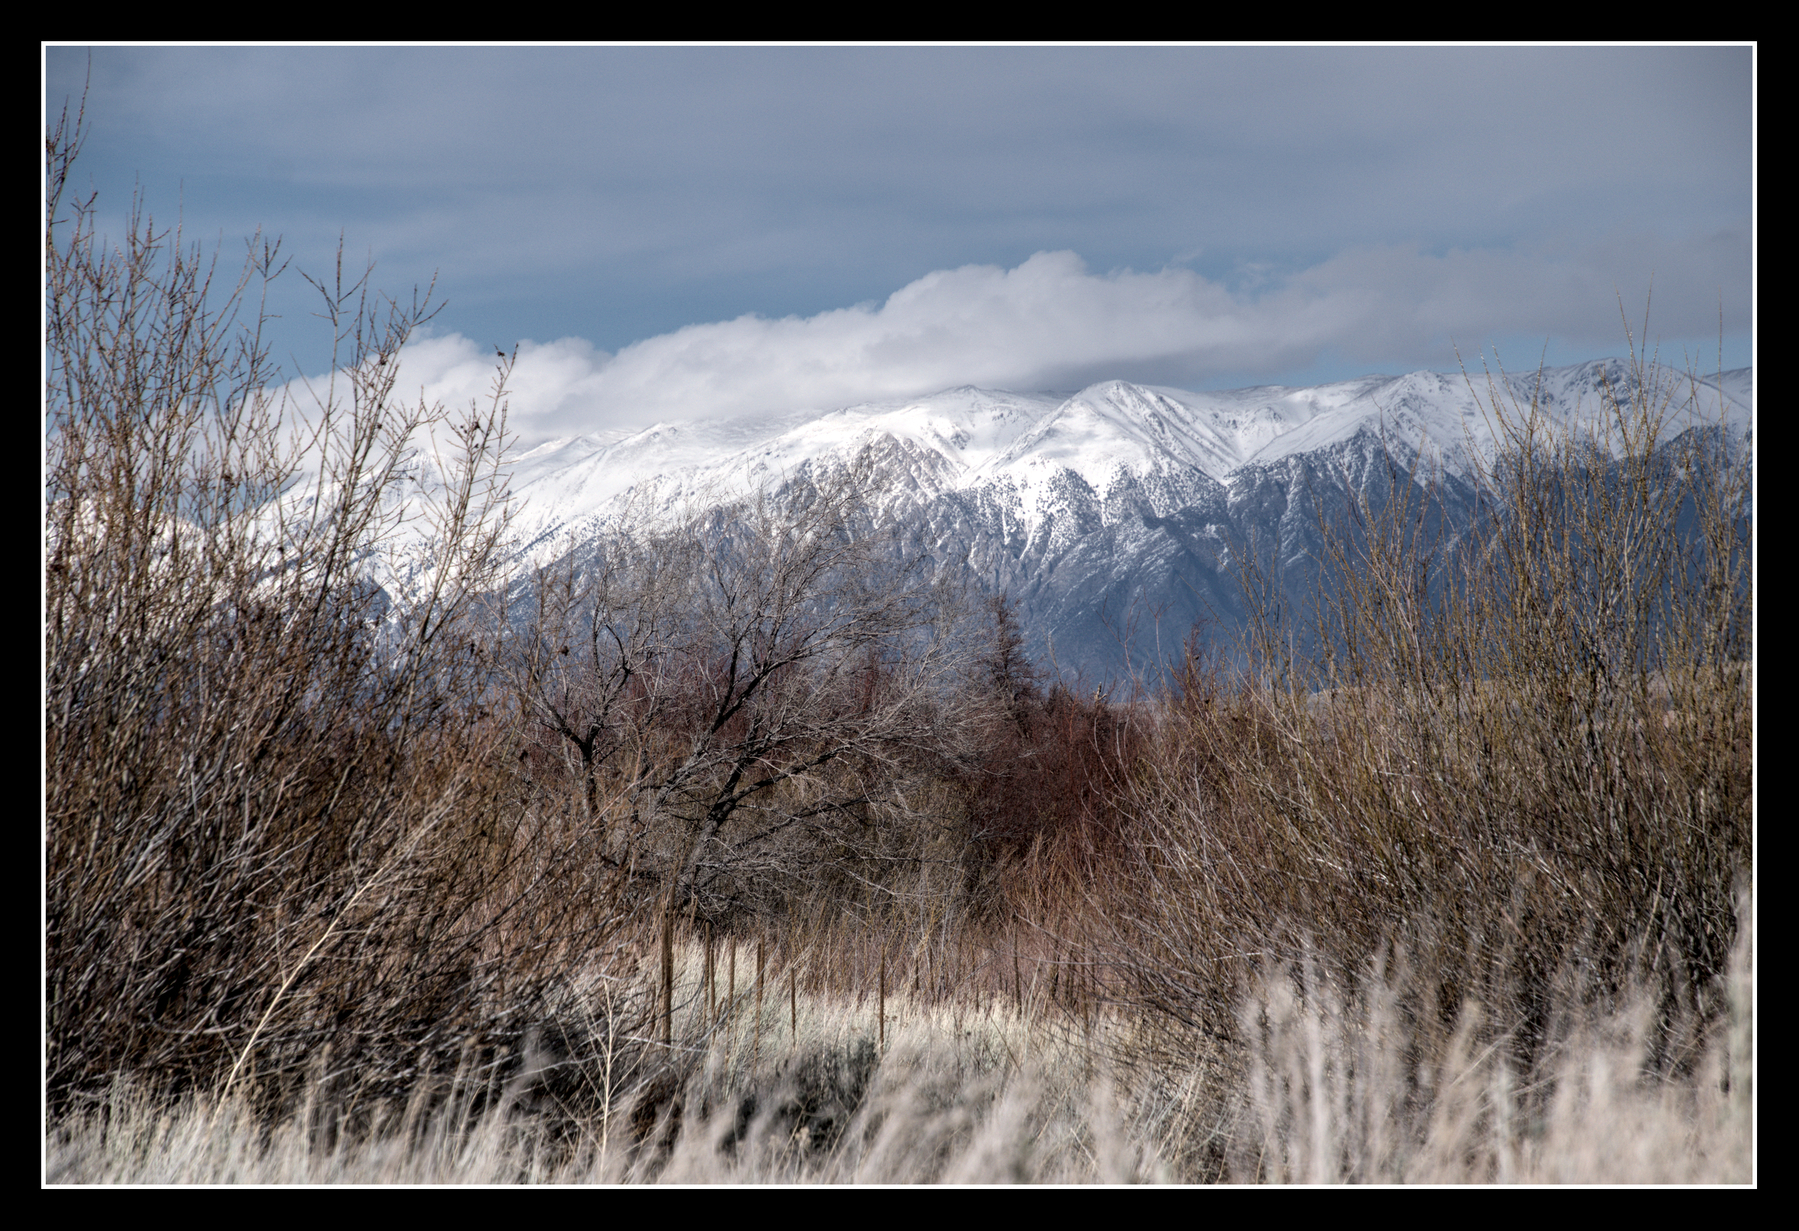 Colorful shrubs call Coyote Willow fill the foreground.  It is winter so they have no leaves, just  muted orangish-purplish stems. Snow-capped mountains can be seen in the distance.